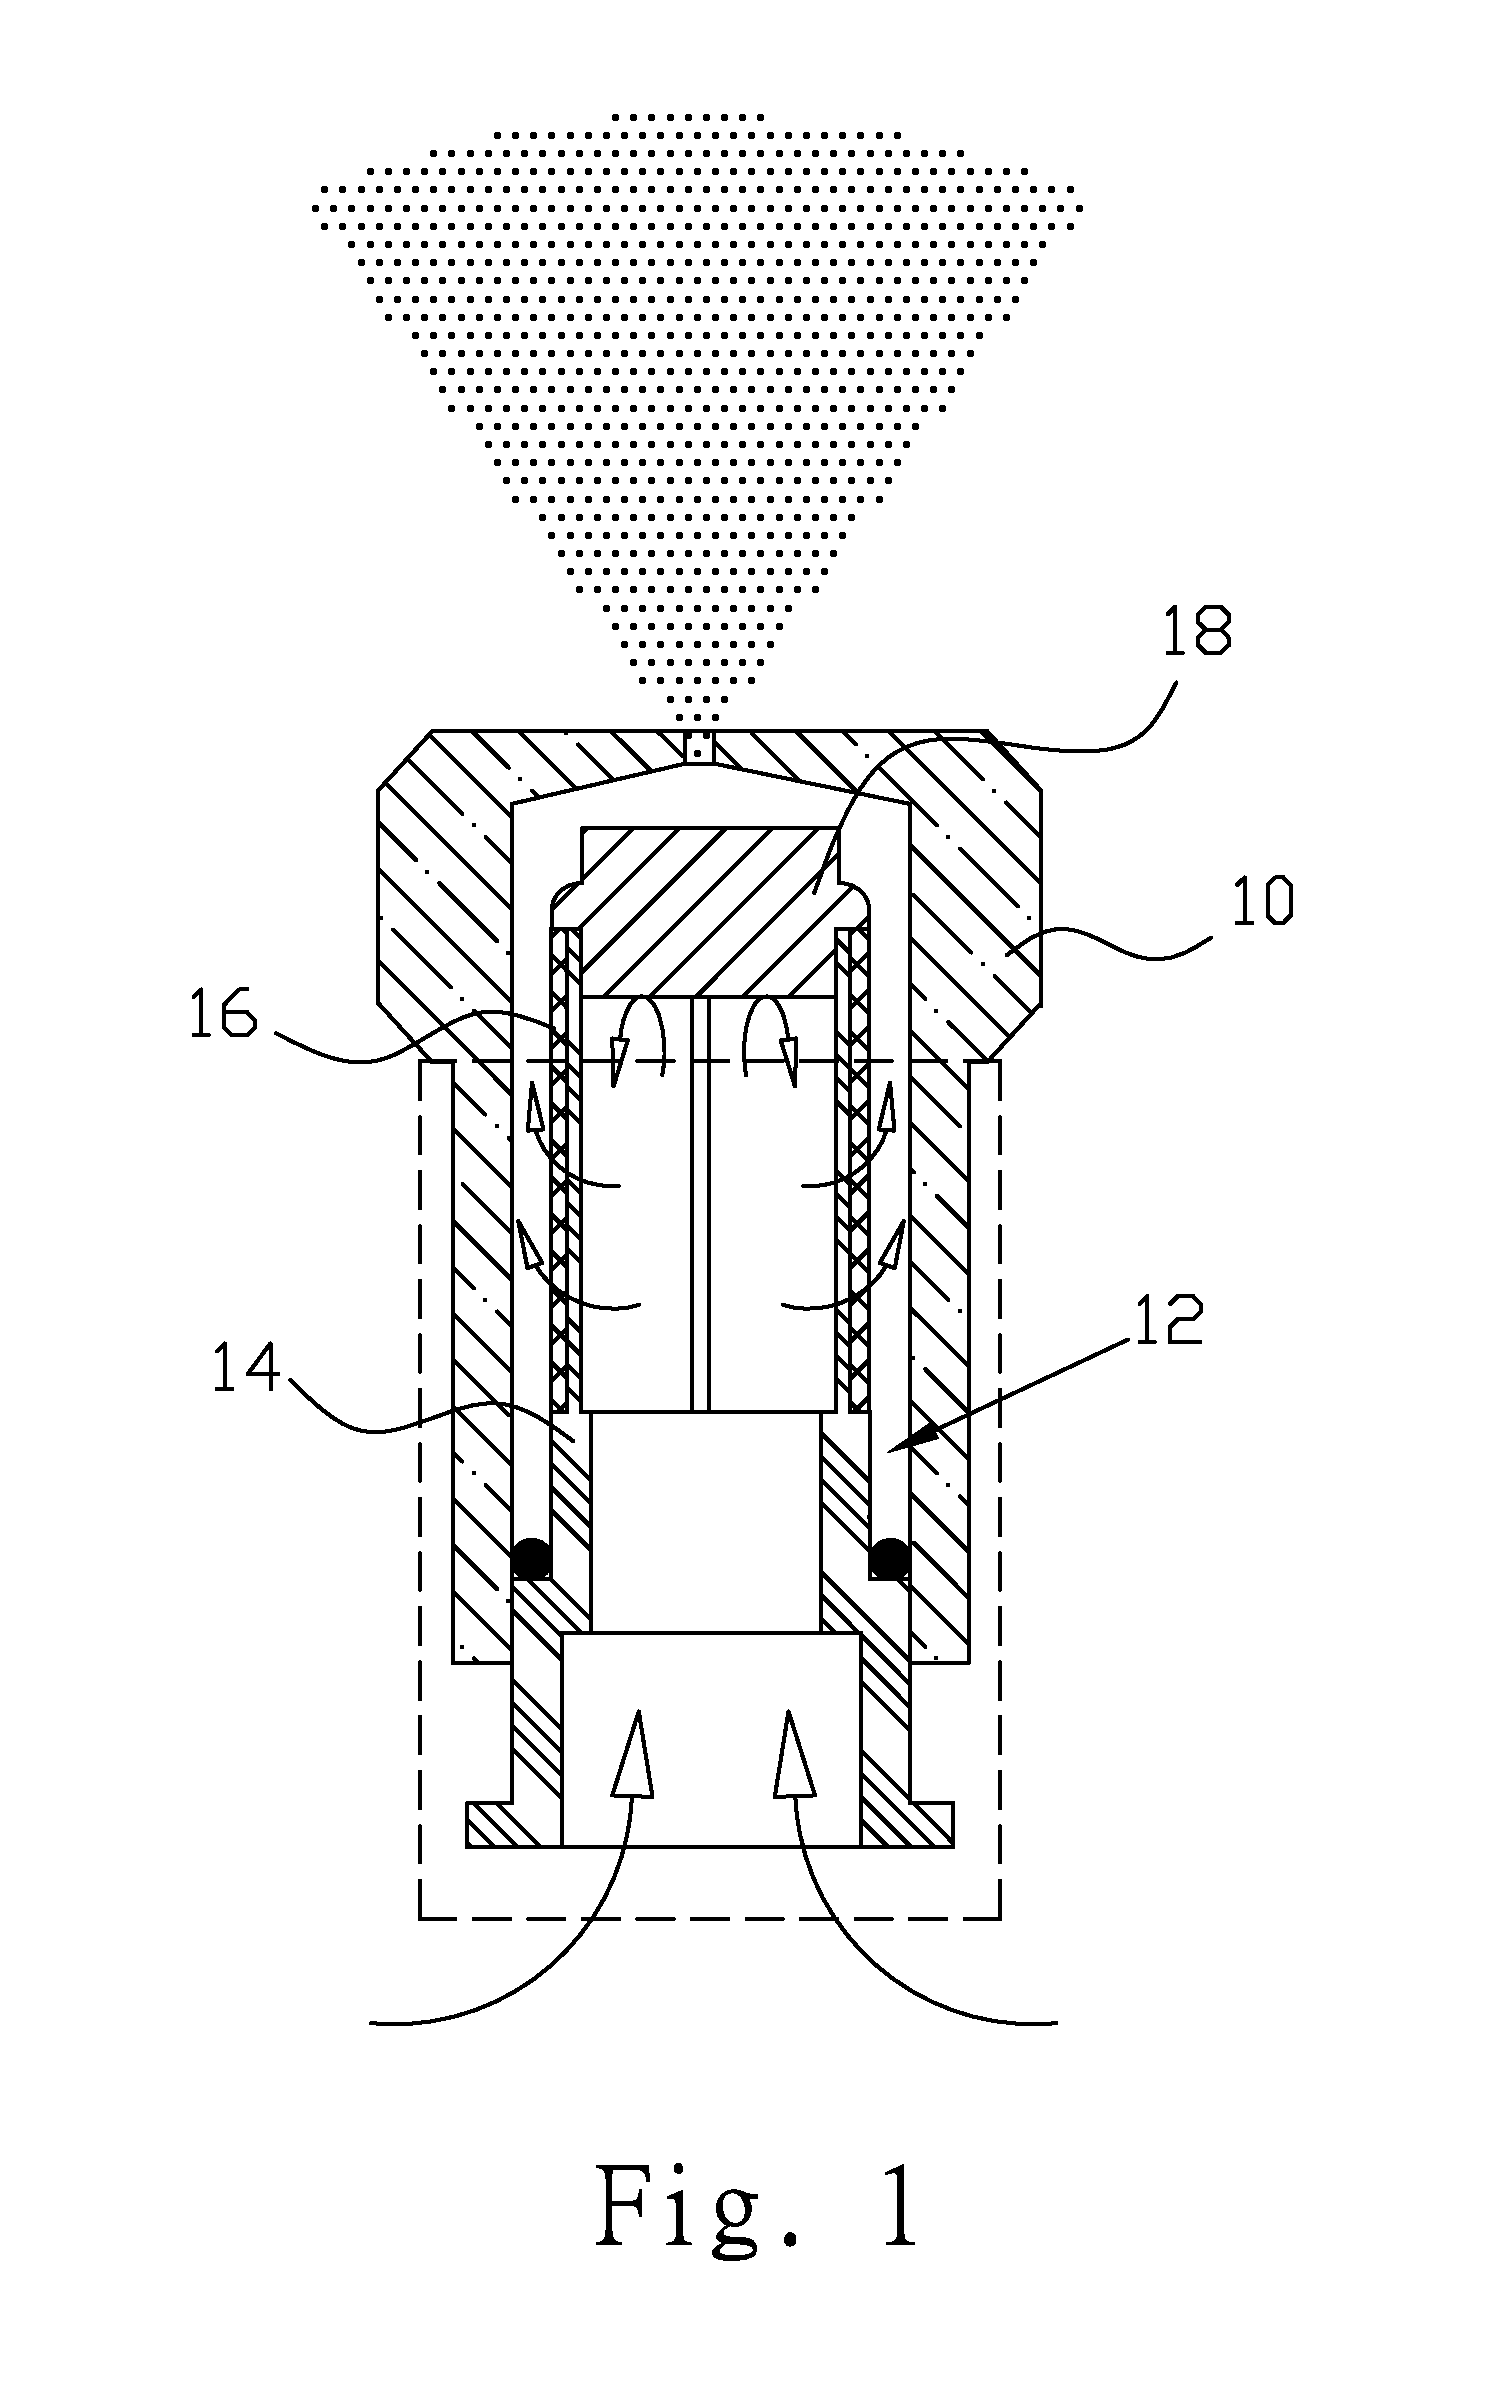 Atomizing nozzle equipped with filtering assembly